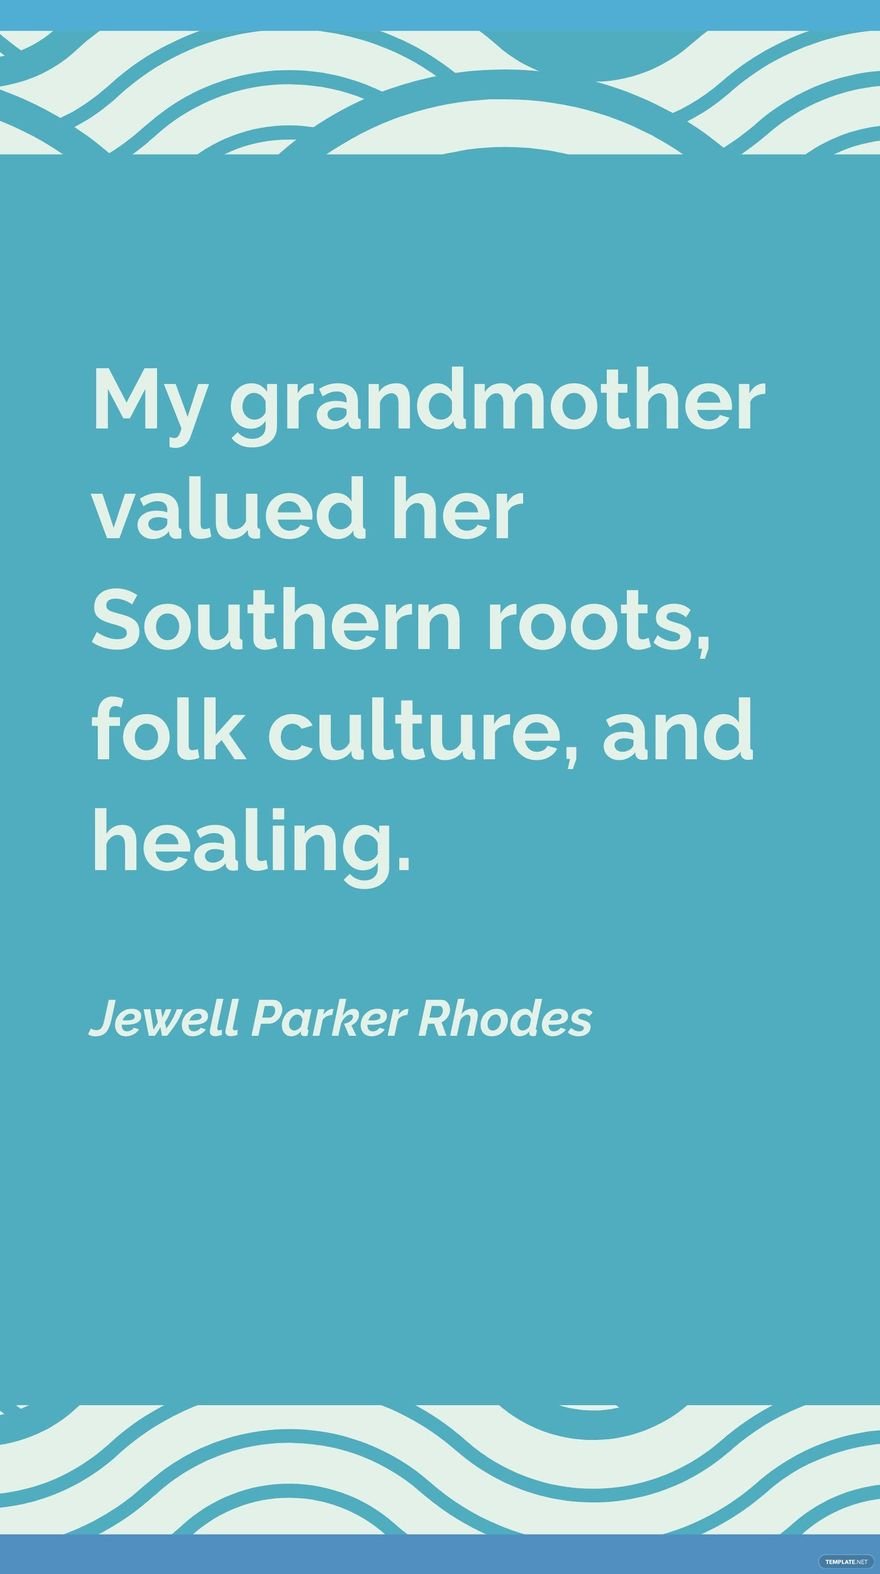 Jewell Parker Rhodes - My grandmother valued her Southern roots, folk culture, and healing.